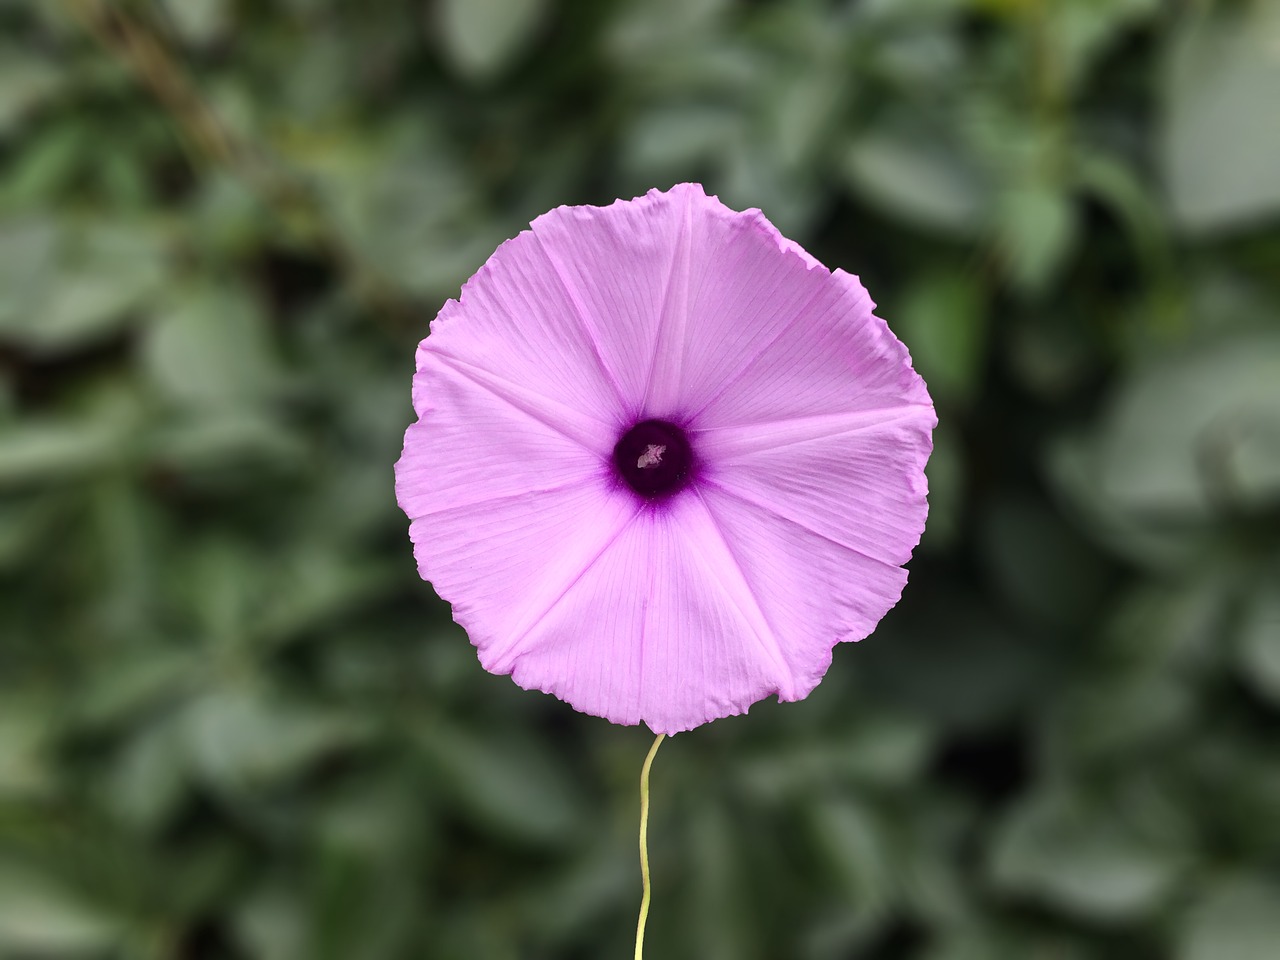 flower out of focus plants free photo